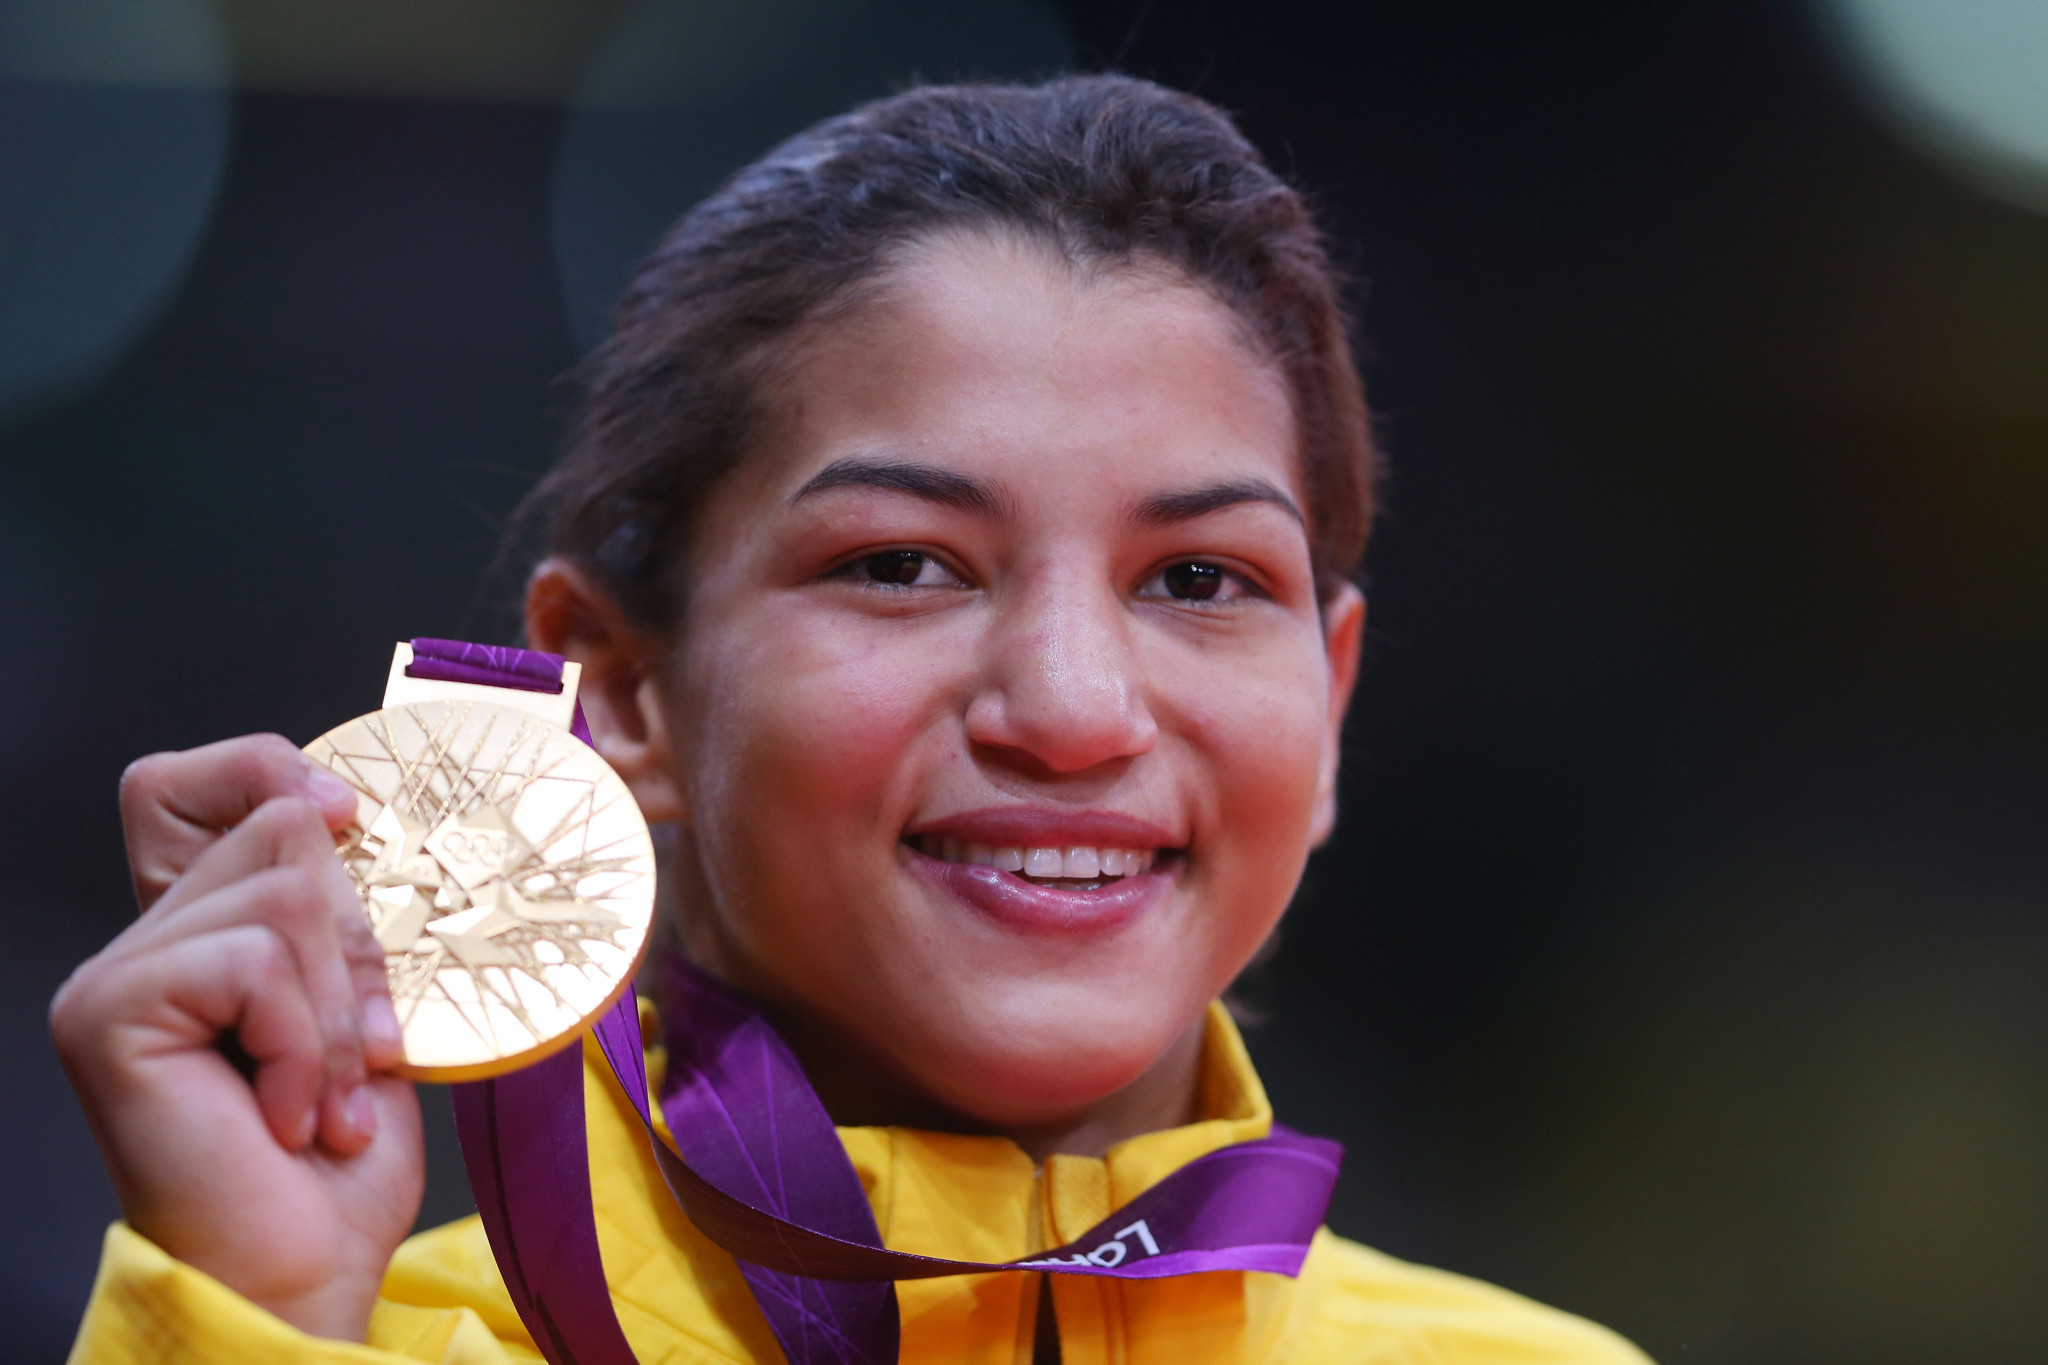 Sarah Menezes won extra-lightweight gold at the London 2012 Olympics ©Getty Images